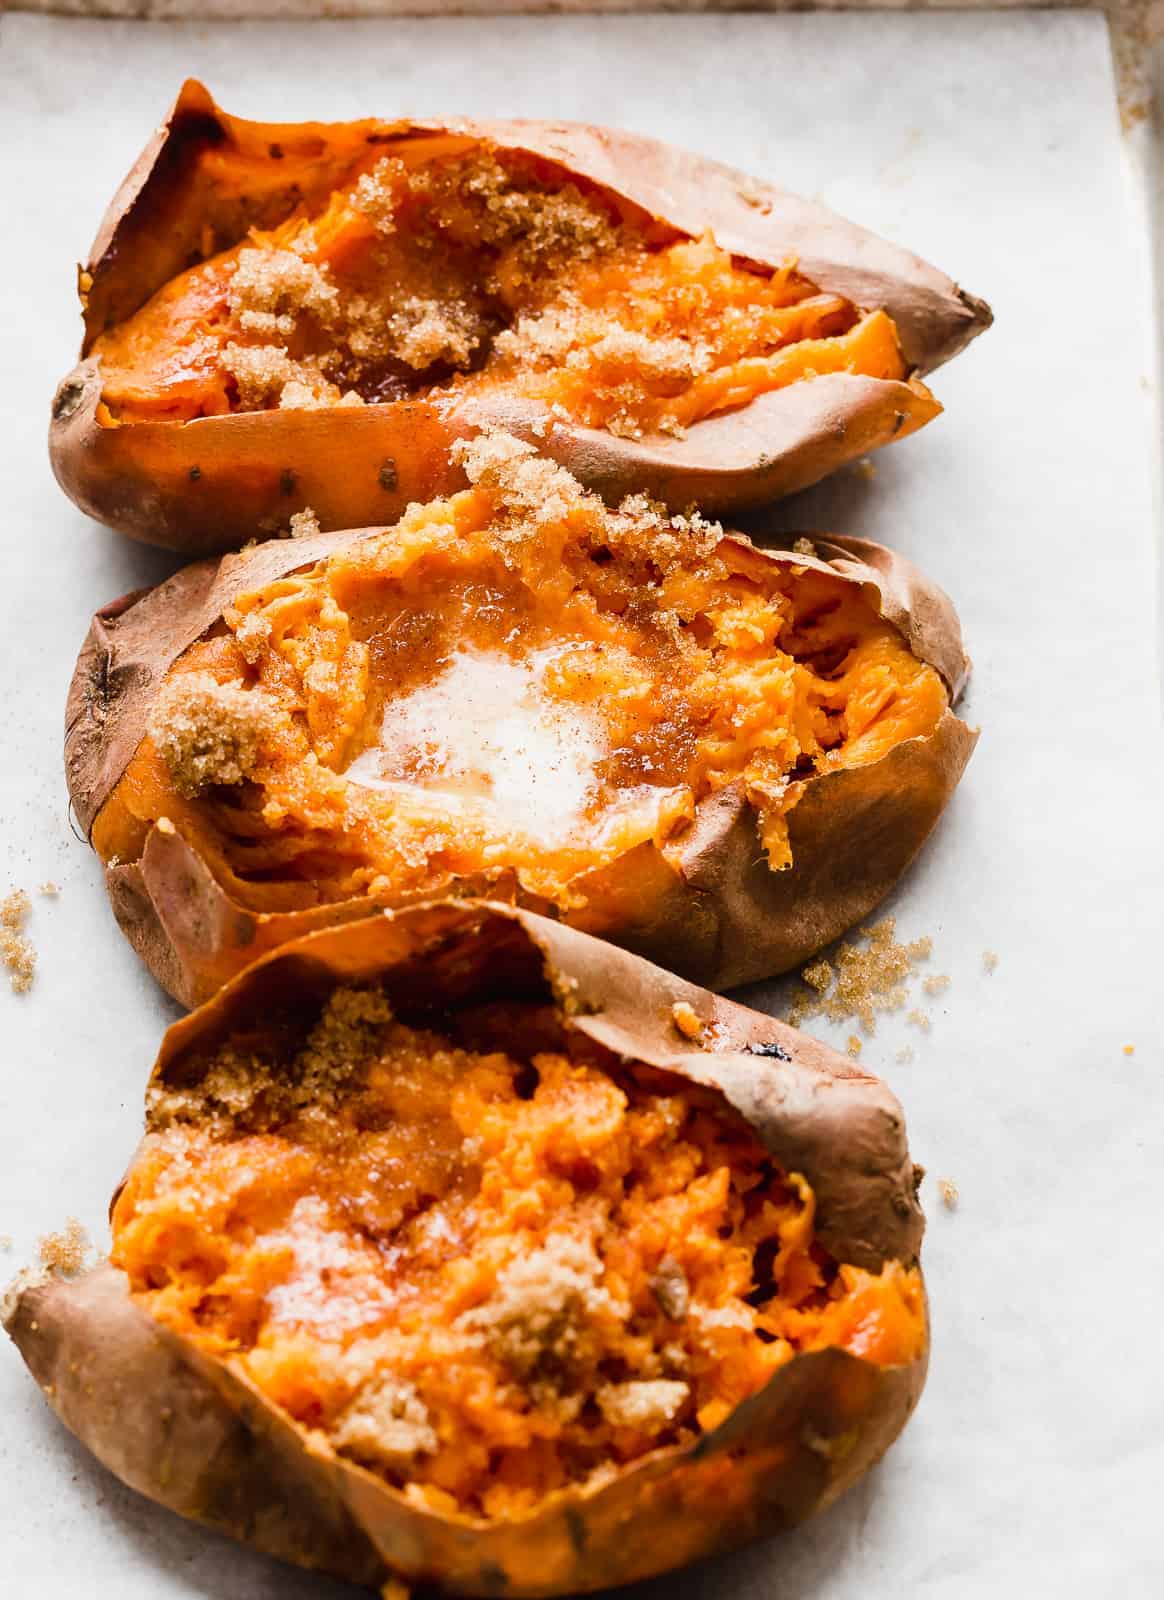 3 Baked sweet potatoes cut open with butter and brown sugar topping.